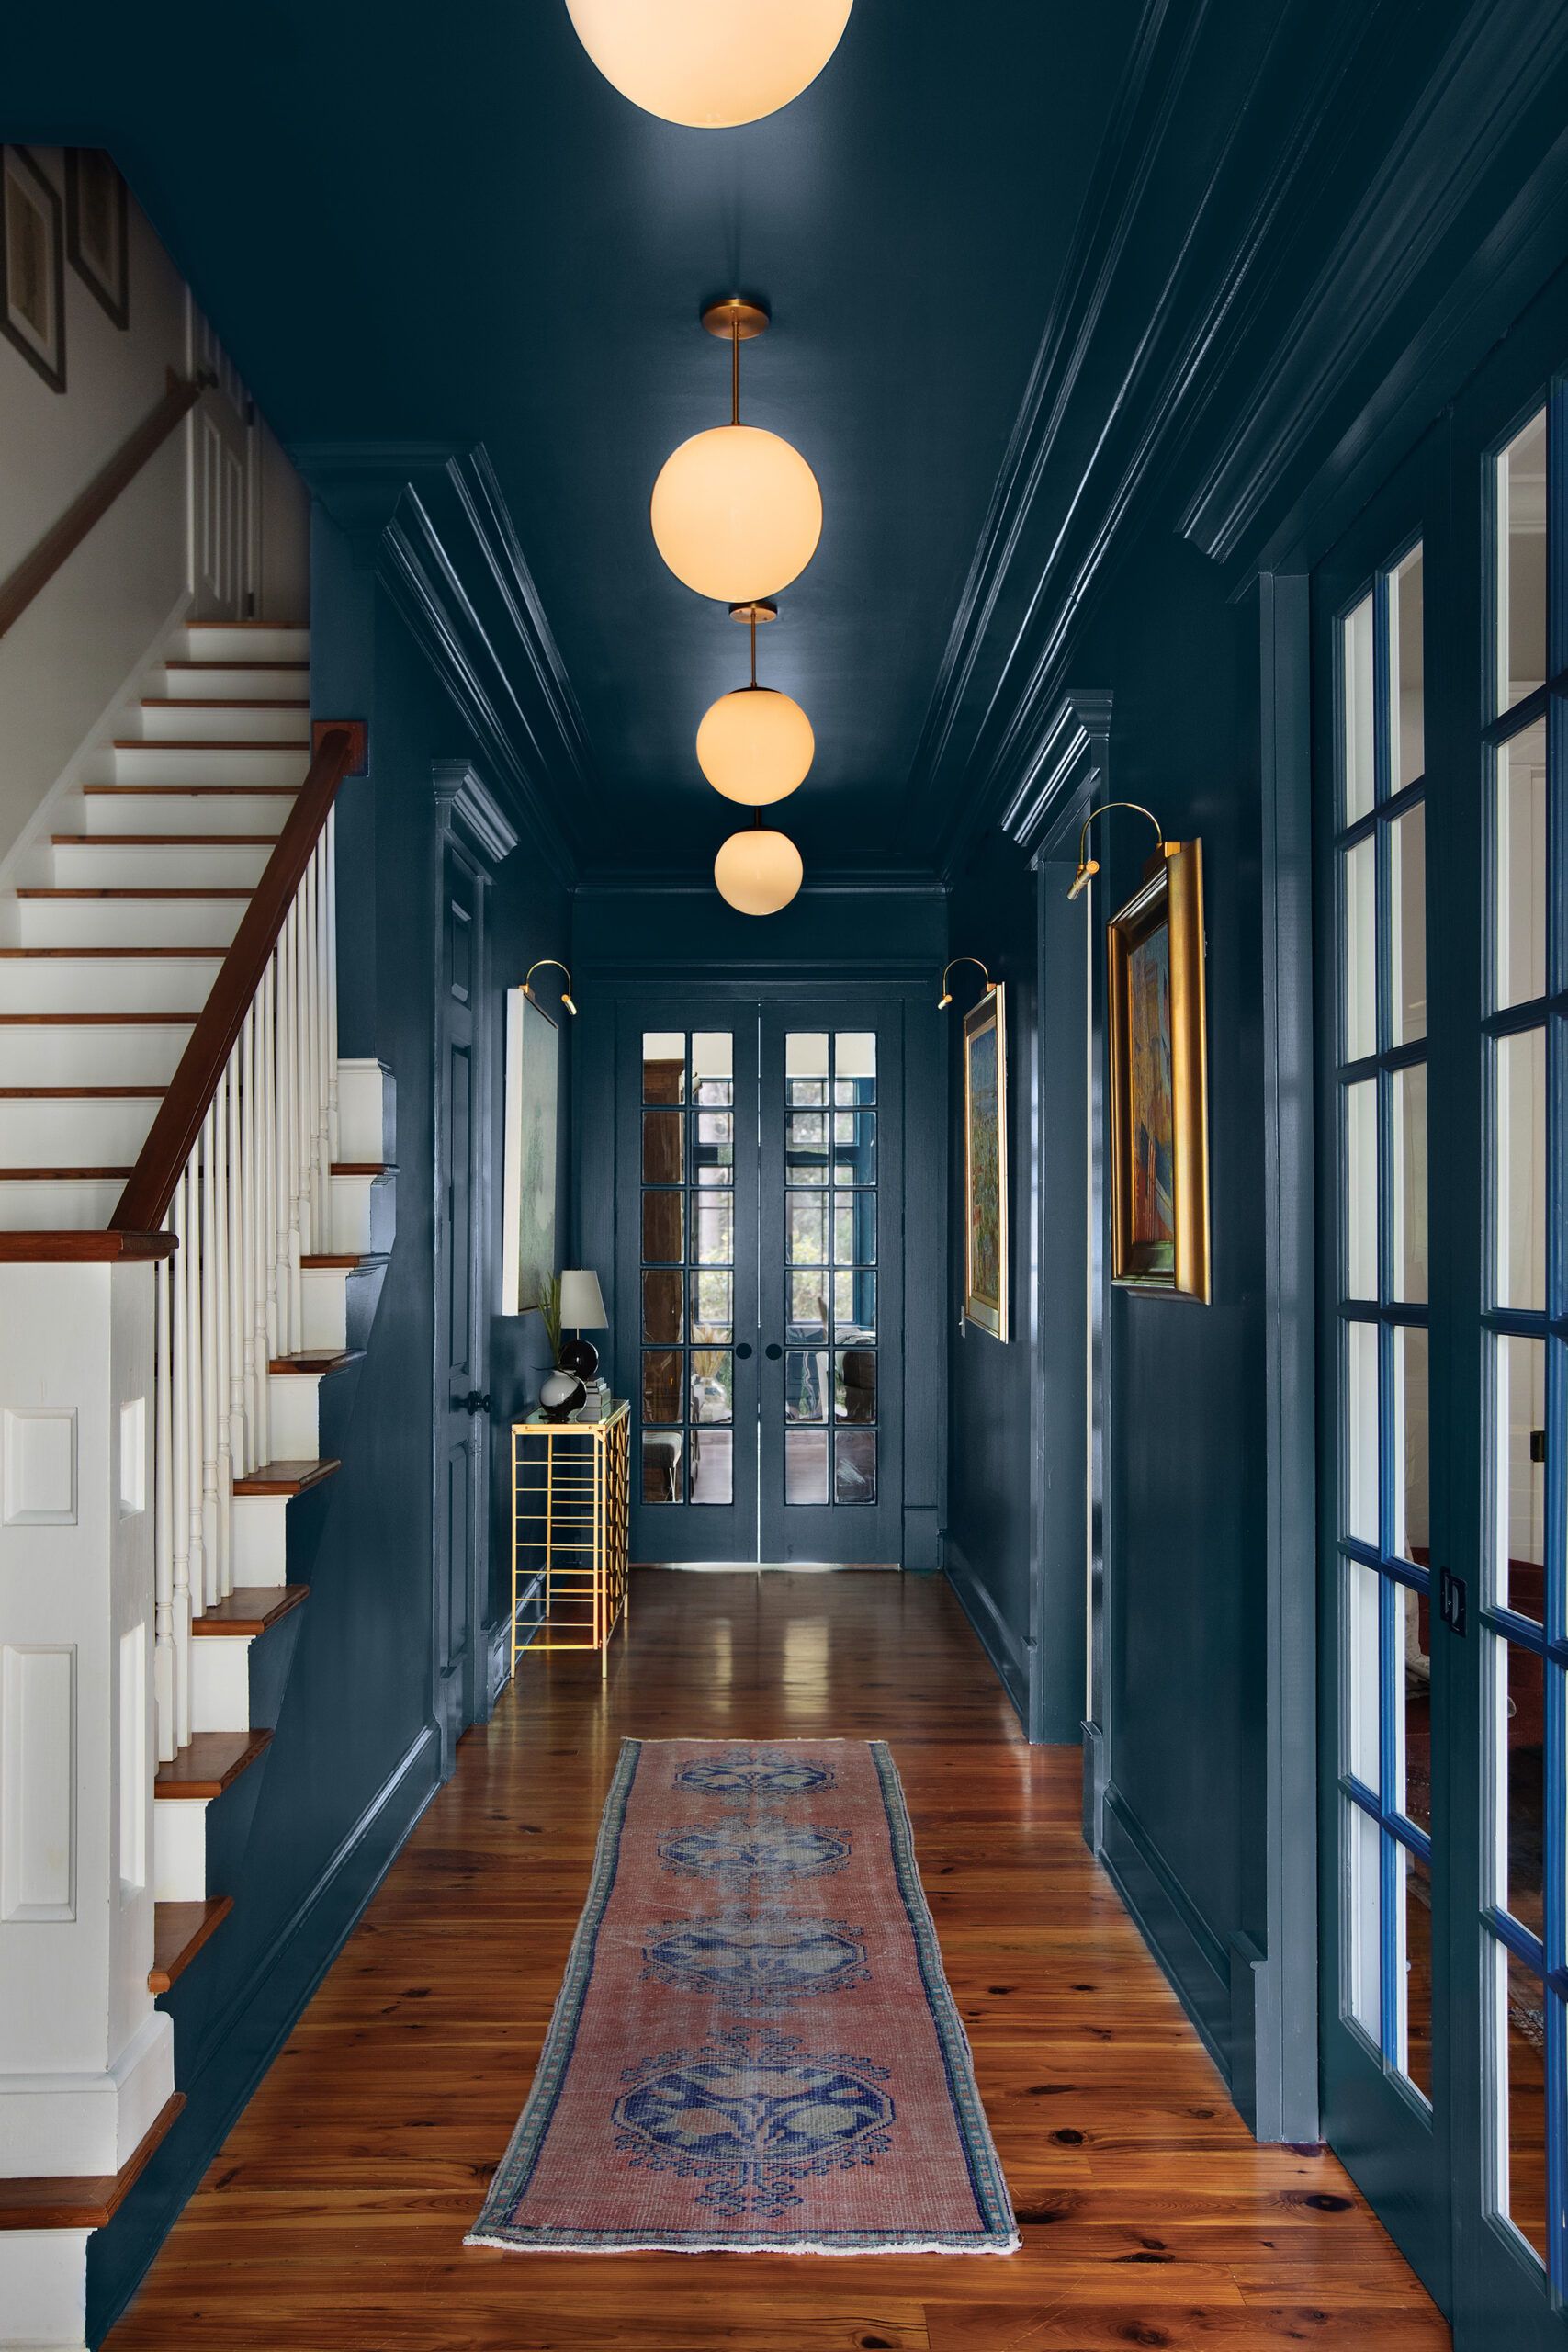 Hallway with the walls trim and doors painted in a dark glossy blue